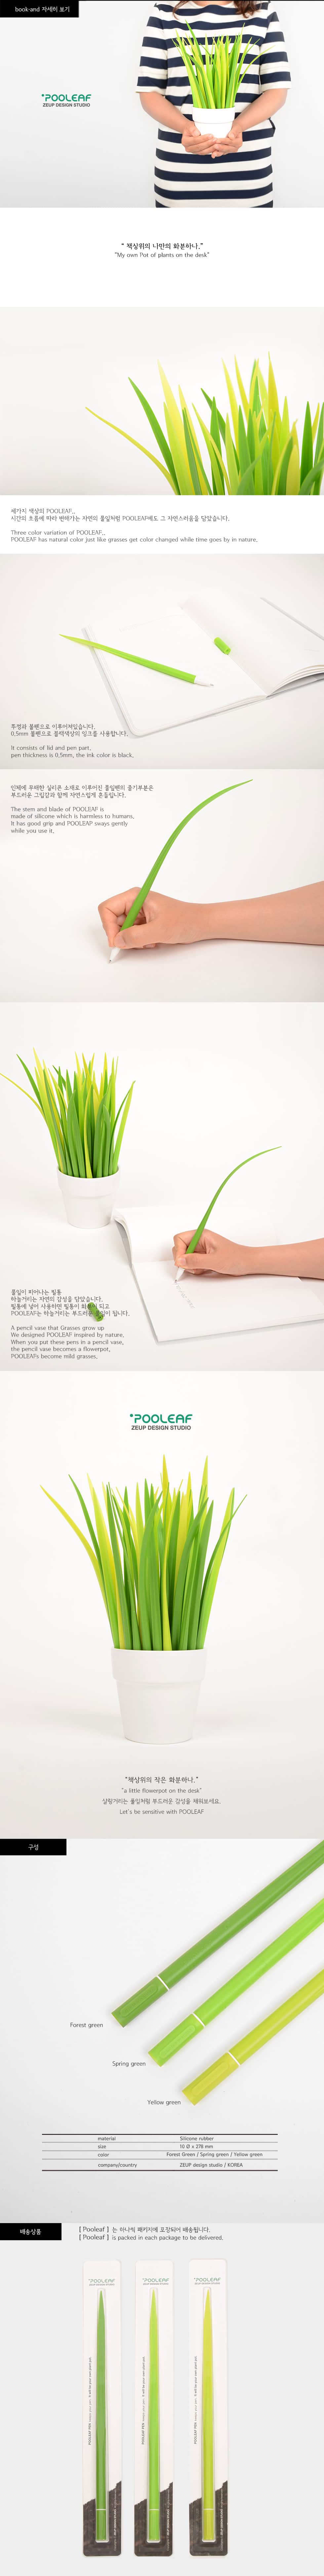 office-plant-green-pens